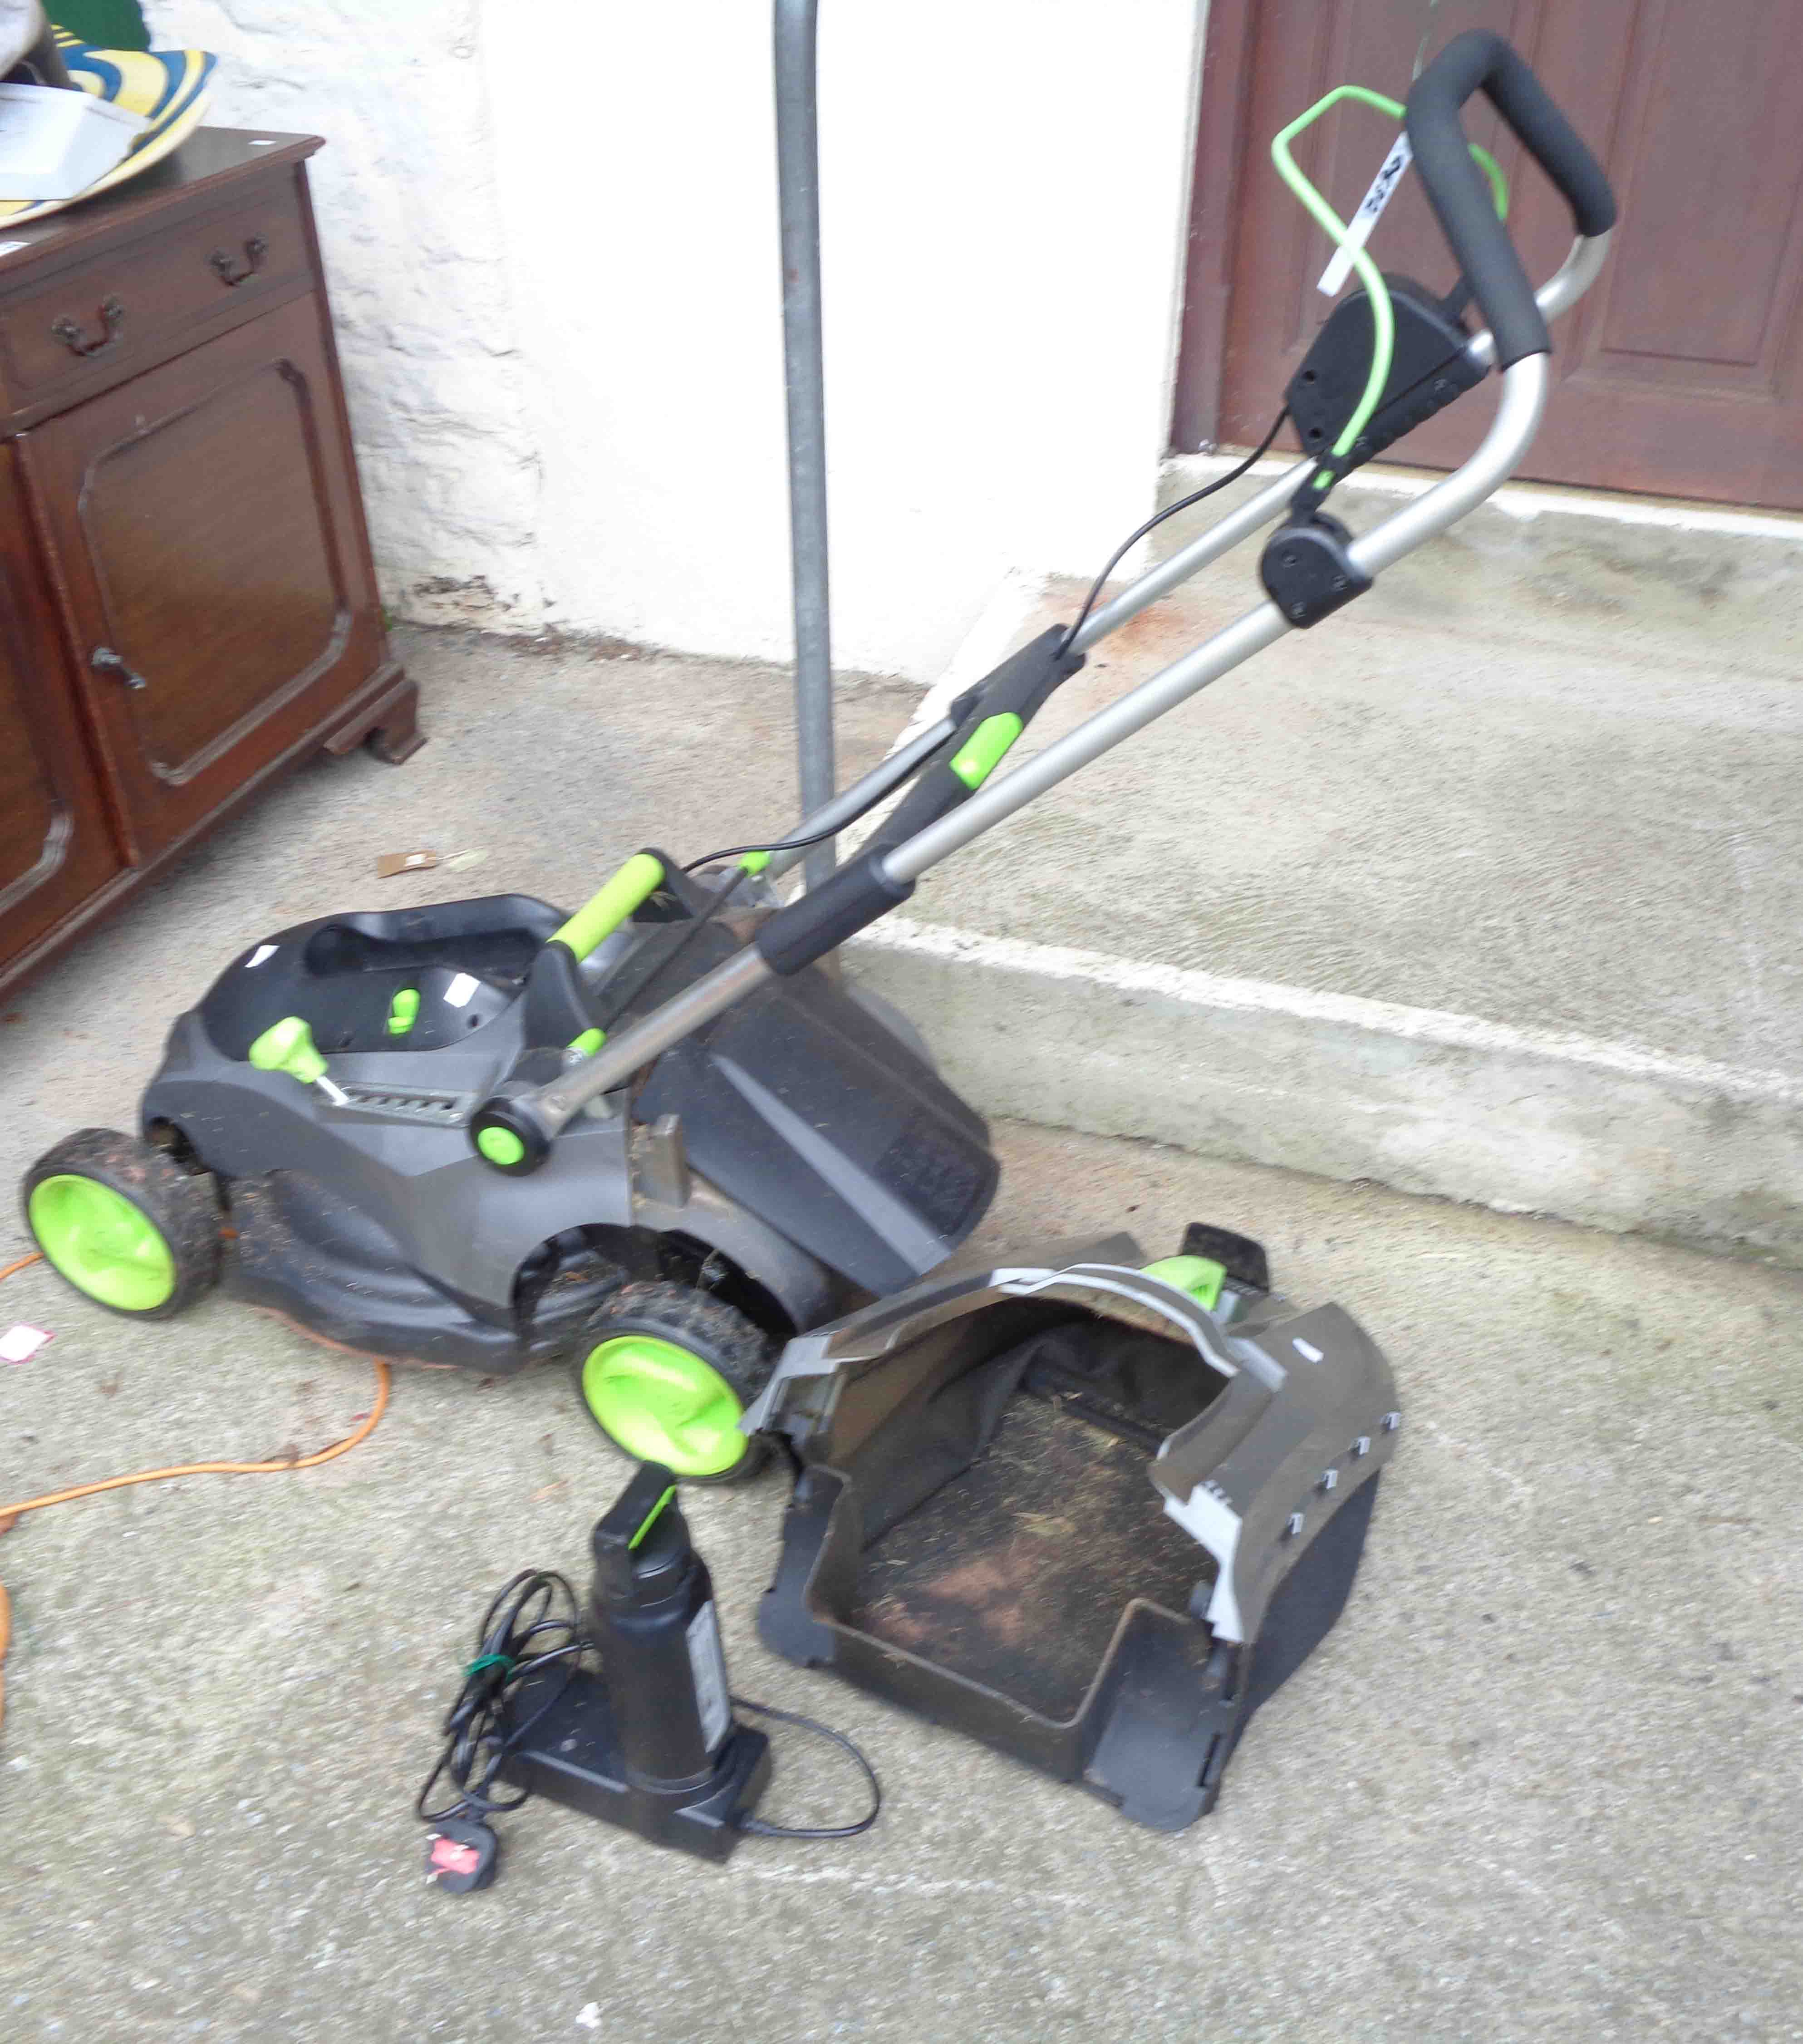 A GTech CLM0001 36V cordless lawn mower, with battery, charger and grass box